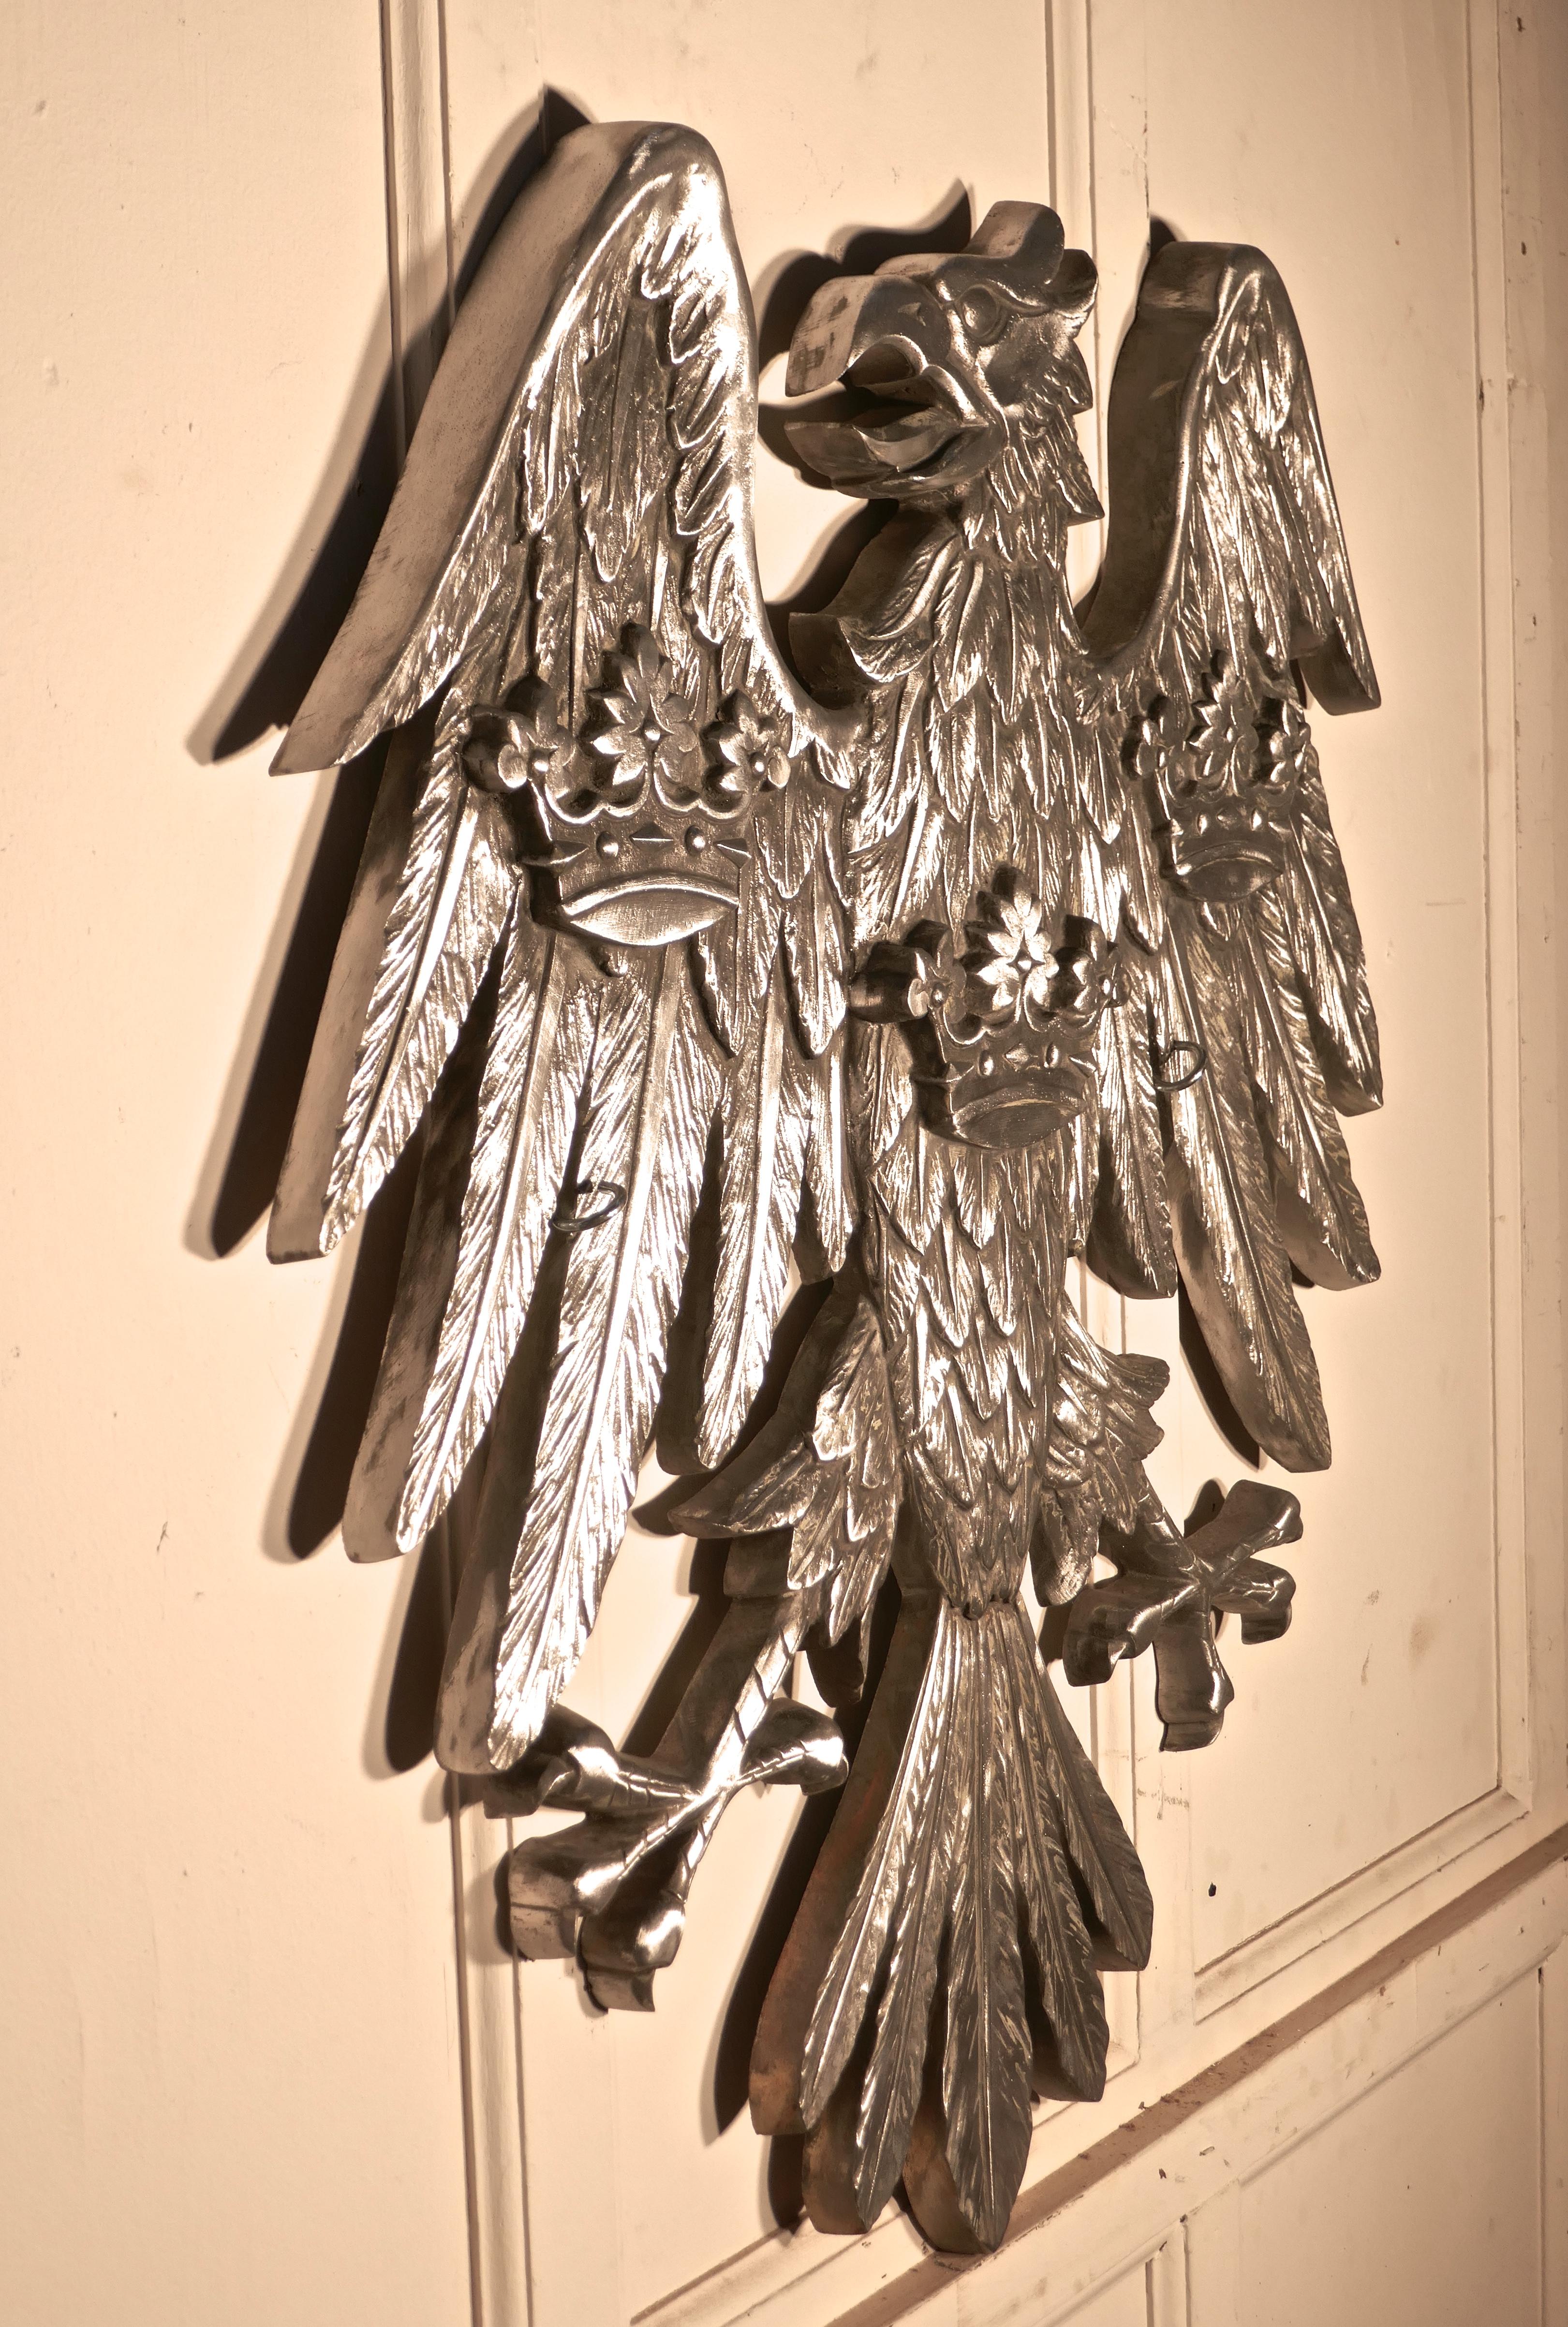 Large spread eagle wall plaque, Heraldic trade sign

This is a very large piece, it is made in polished silver metal, the plaque would have been displayed by the Barclays Bank company
Our giant eagle has 3 crowns cast on its feathers, it is in